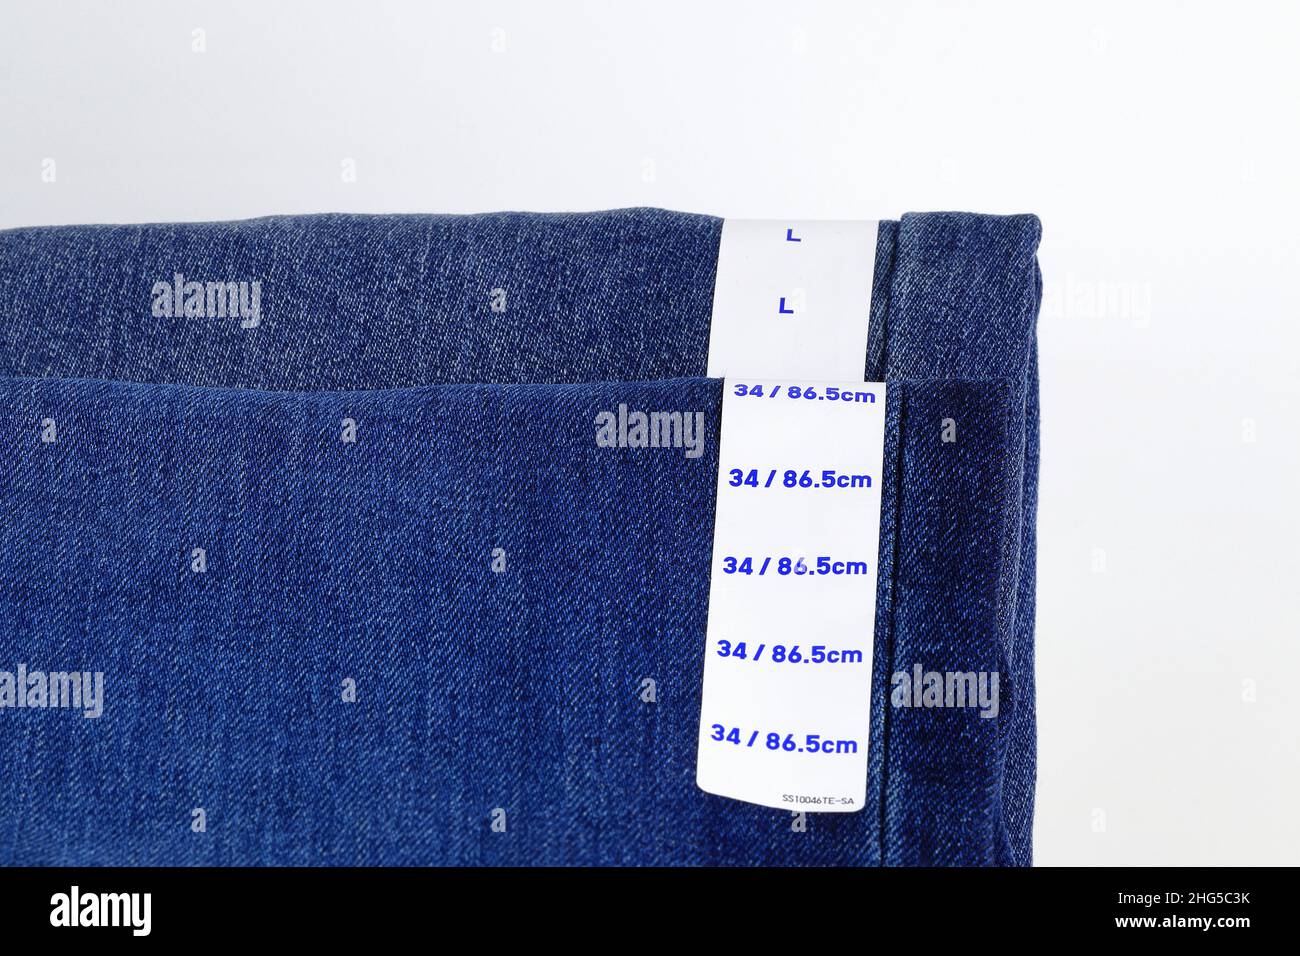 Blue jeans denim with label size, collection jeans stacked with label ...